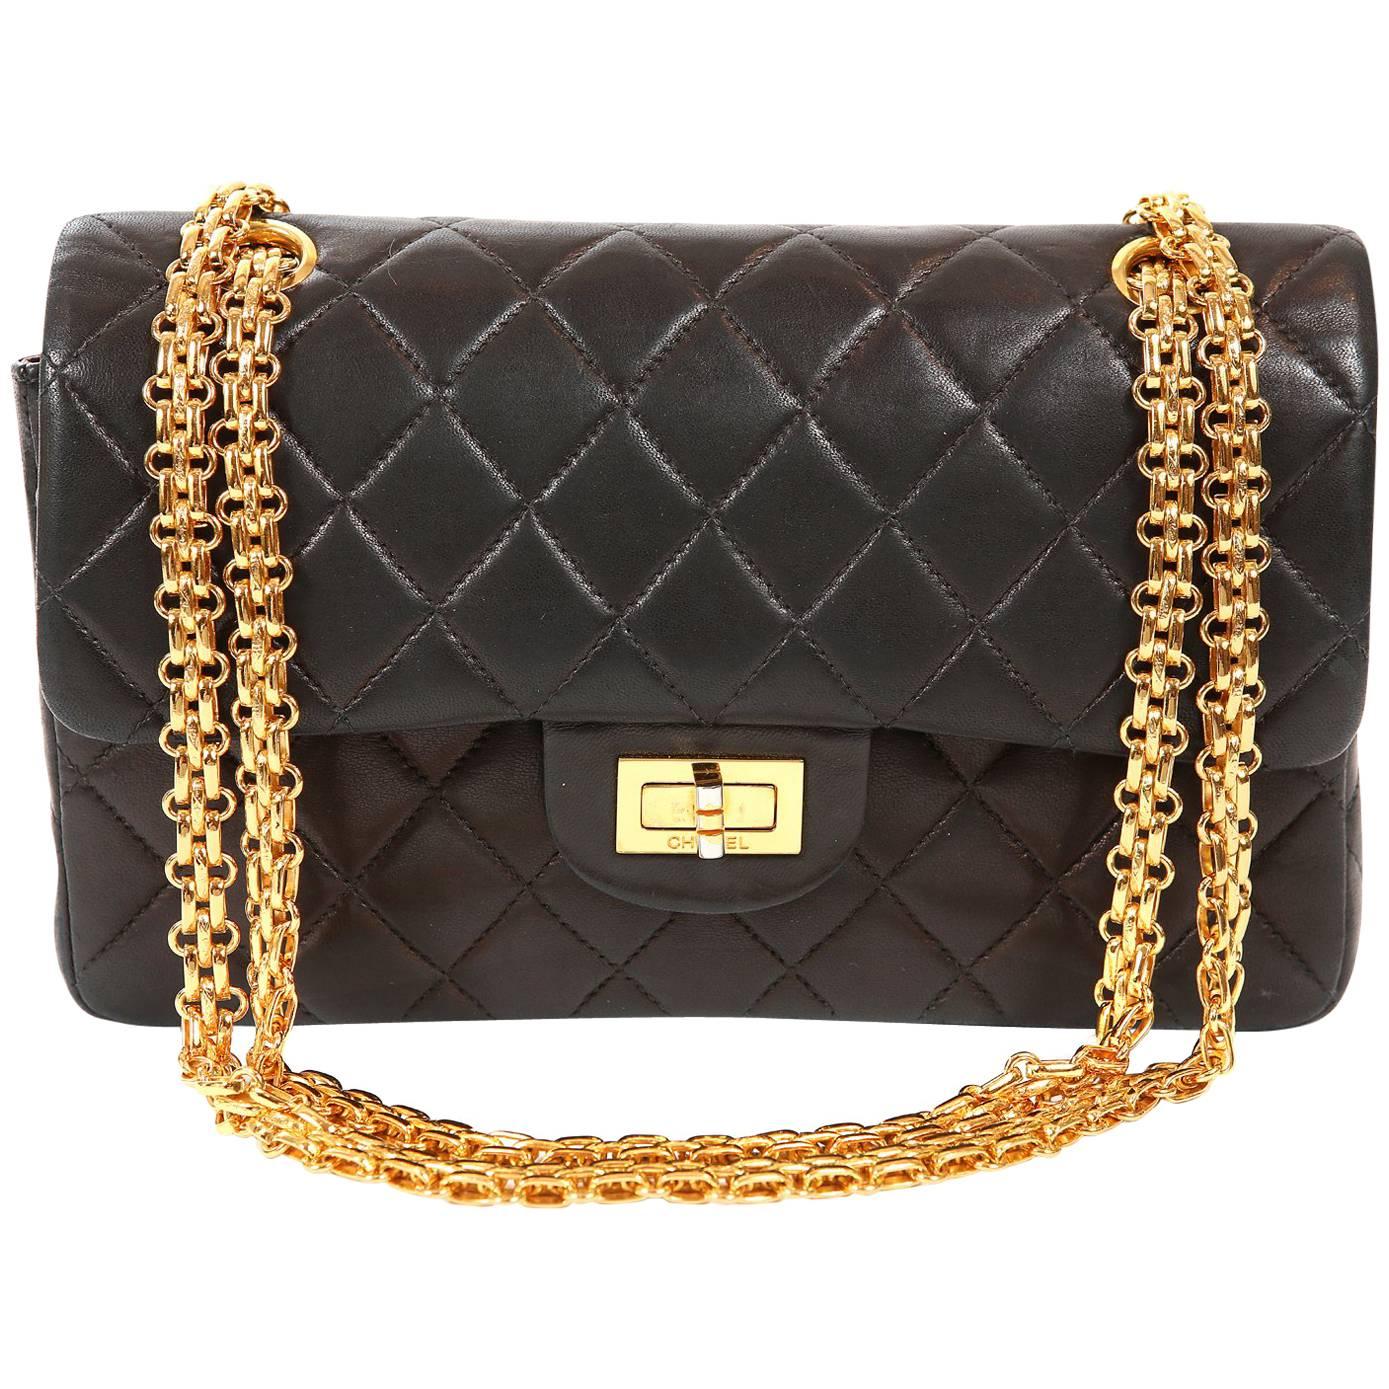 Chanel Black Lambskin 2.55 Reissue Medium Flap Bag with Gold Hardware For Sale